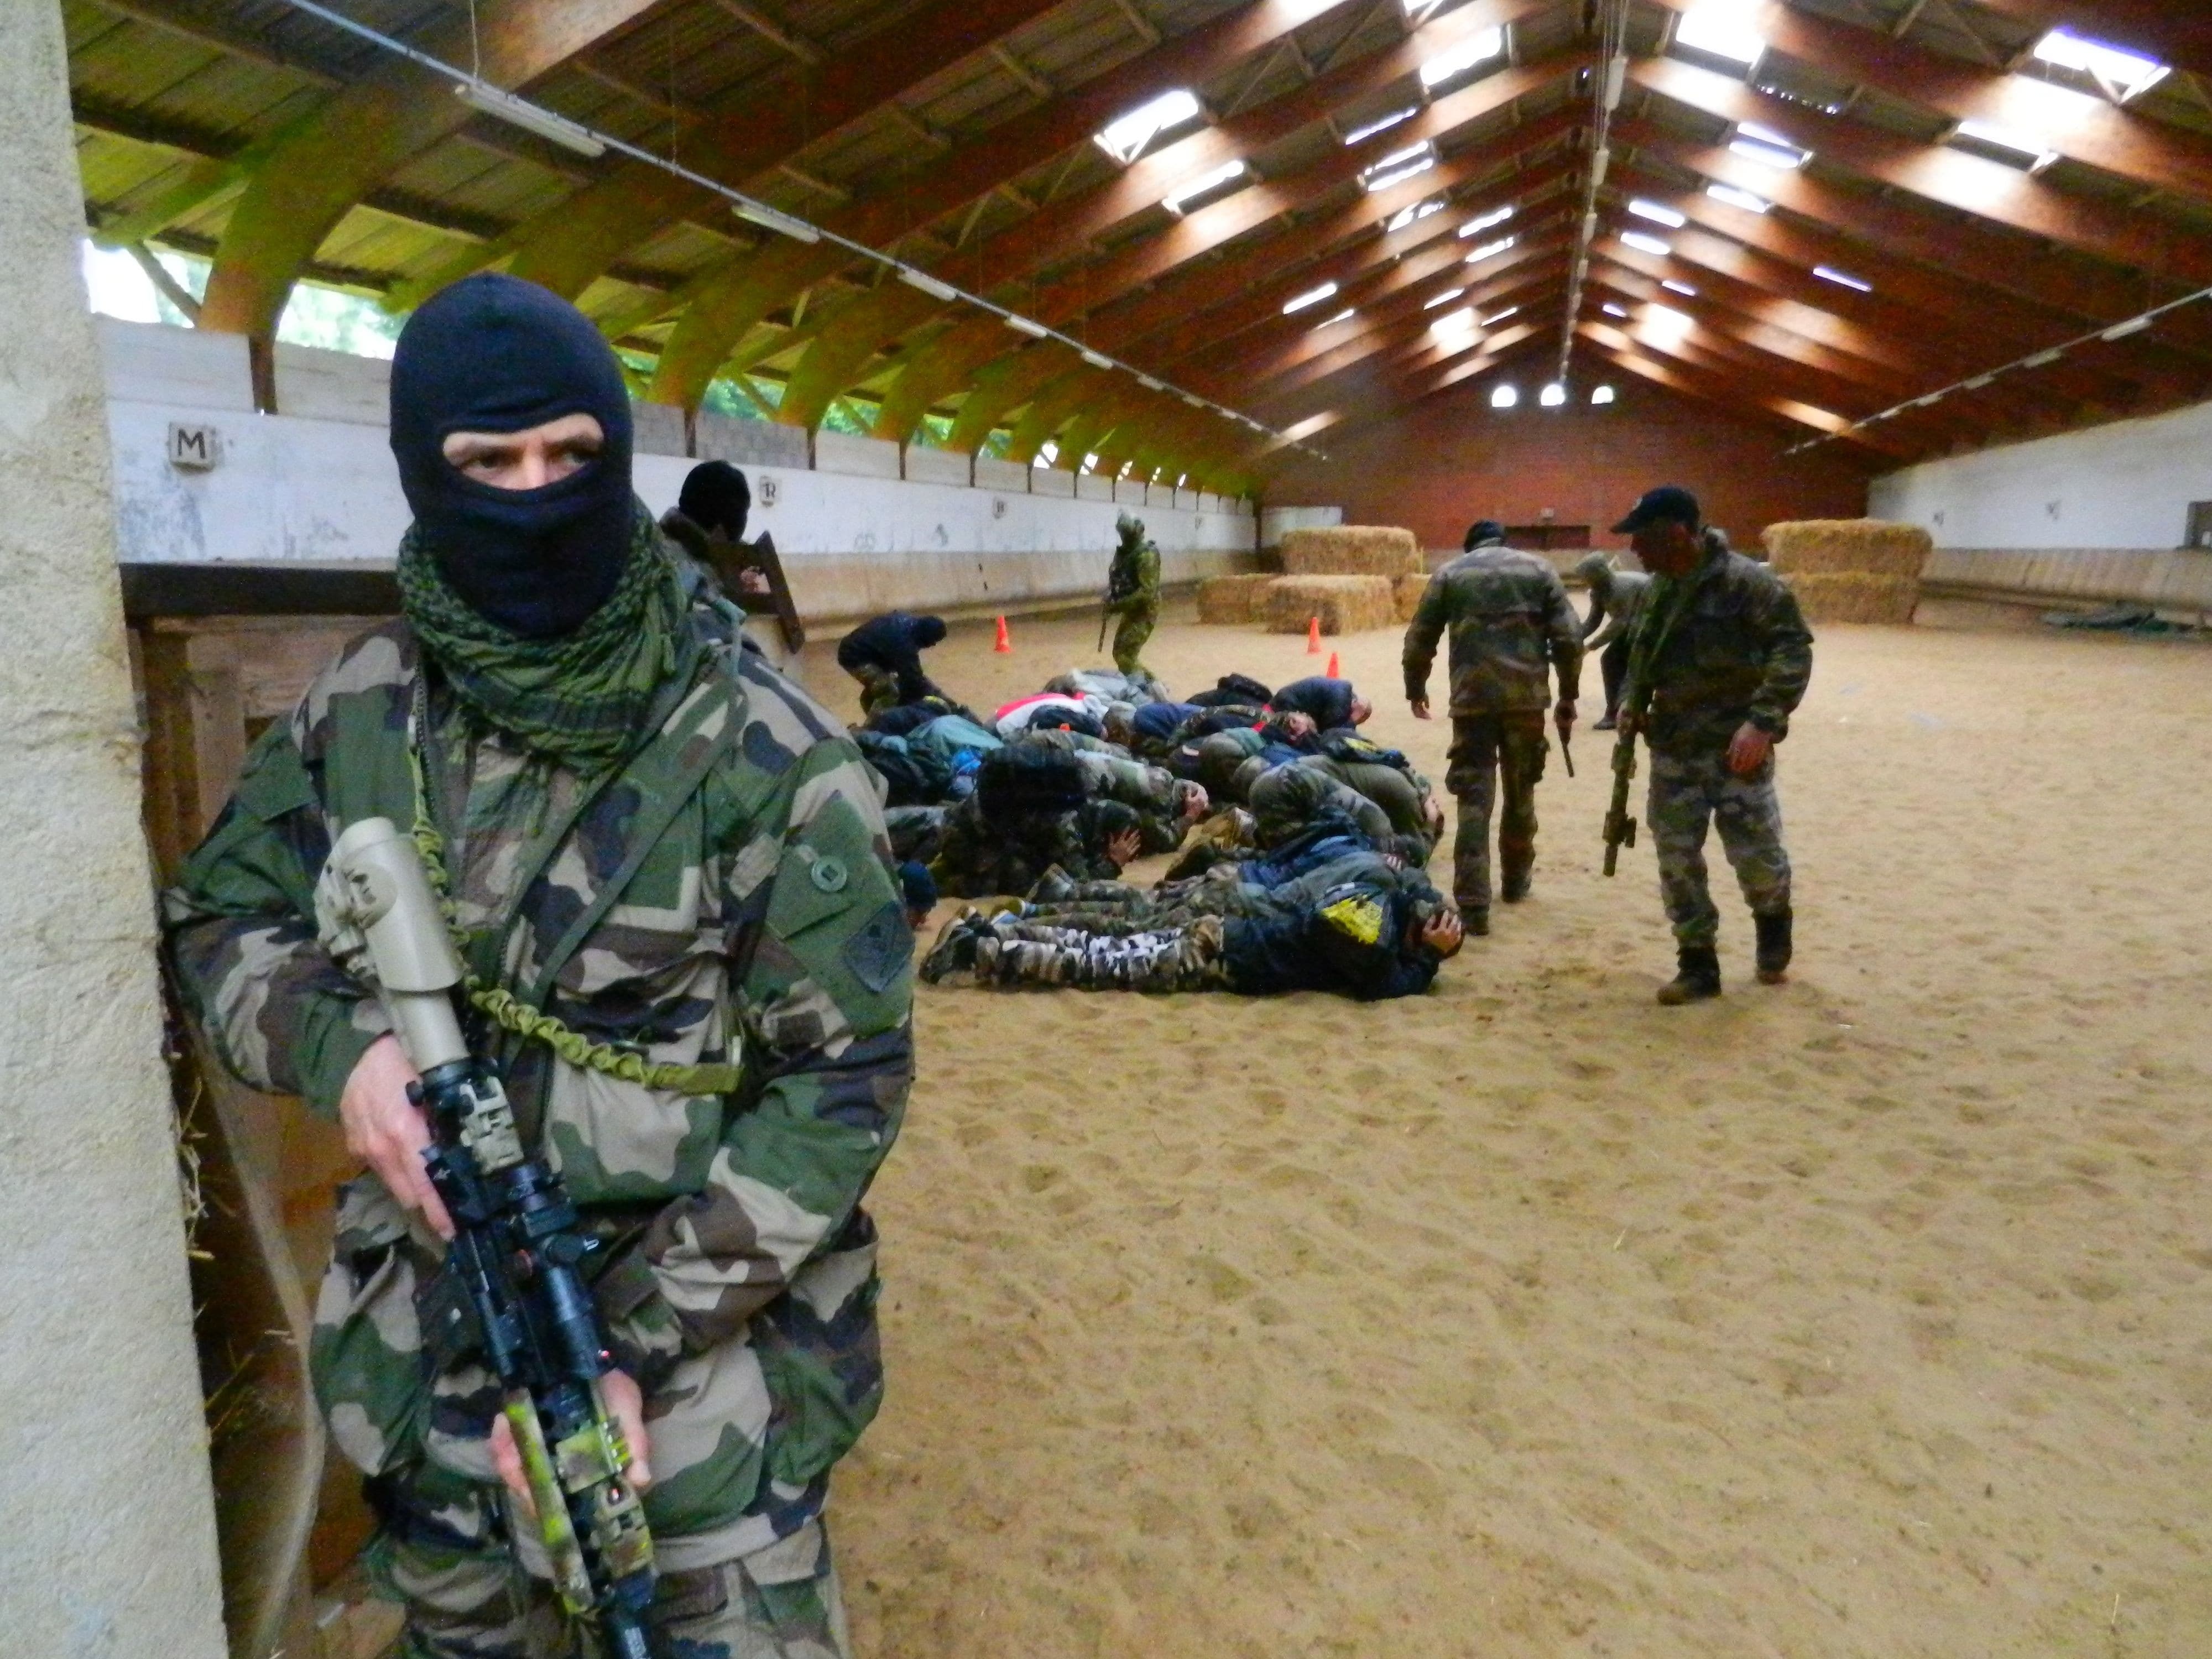 Jim had a chance to teach his Terrorism Survival in France, and jump in on training as an observer when French commandos taught their portion of the training.